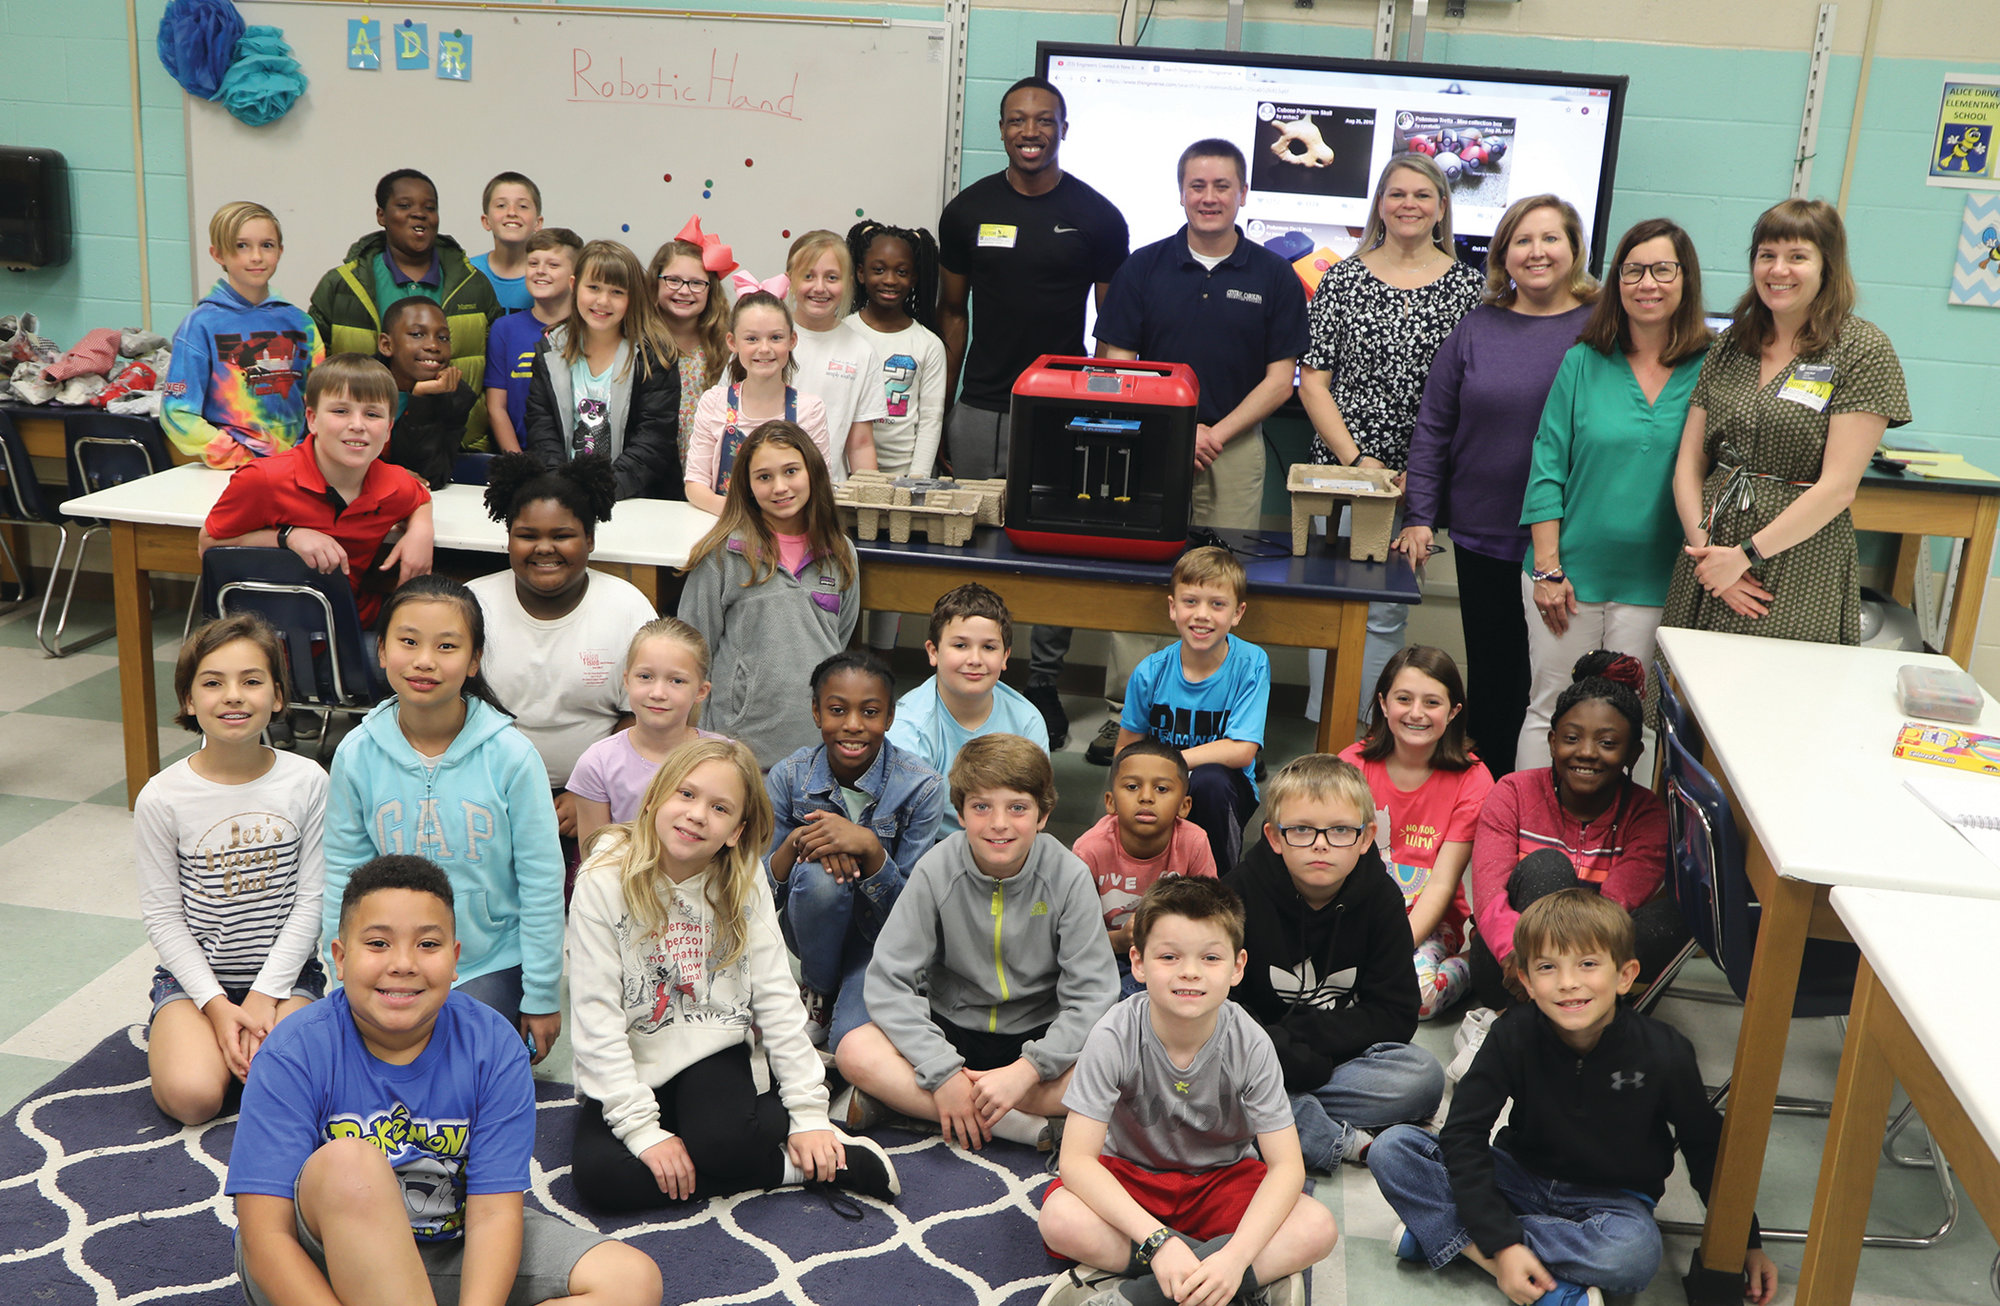 CCTC donated a new 3-D printer to Alice Drive Elementary School's STEM lab on April 8 as part of Partners in Education.